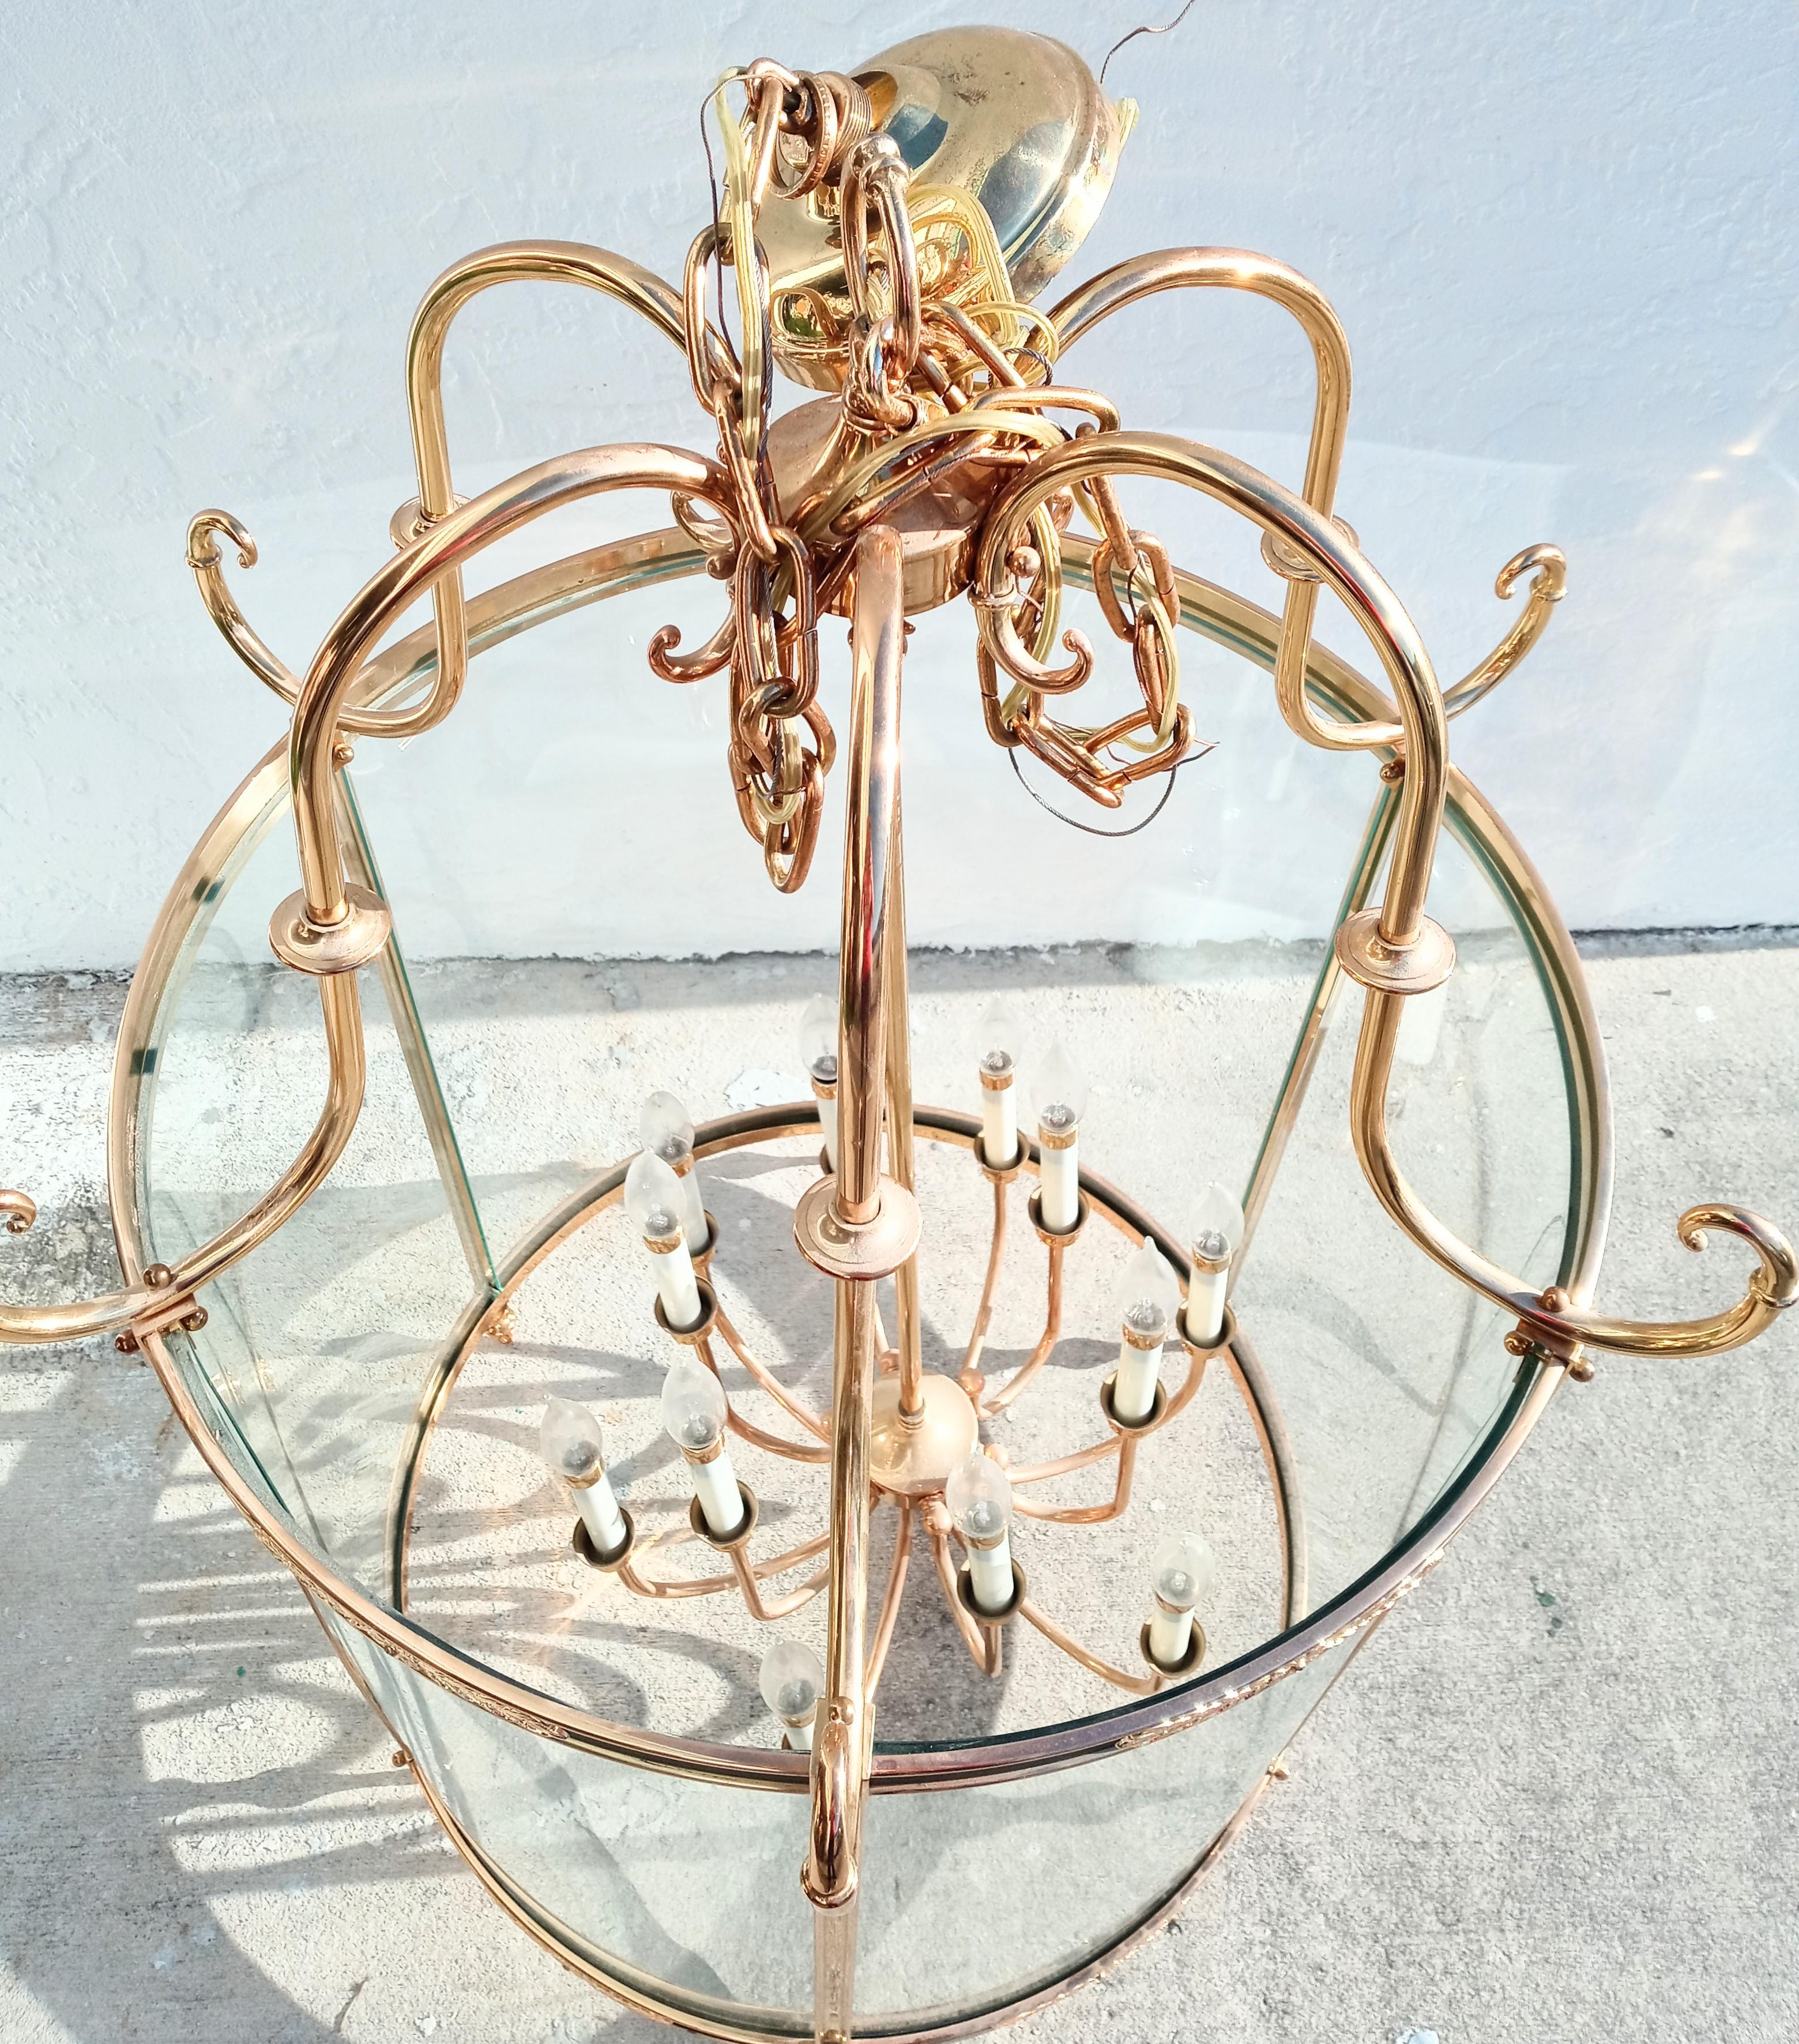 A monumental mansion size solid brass and curved glass cylindrical foyer chandelier.
This light fixture is extremely large with a striking presence.
The photographs truly do not do it justice.
It features 12 candelabra sockets with black accents